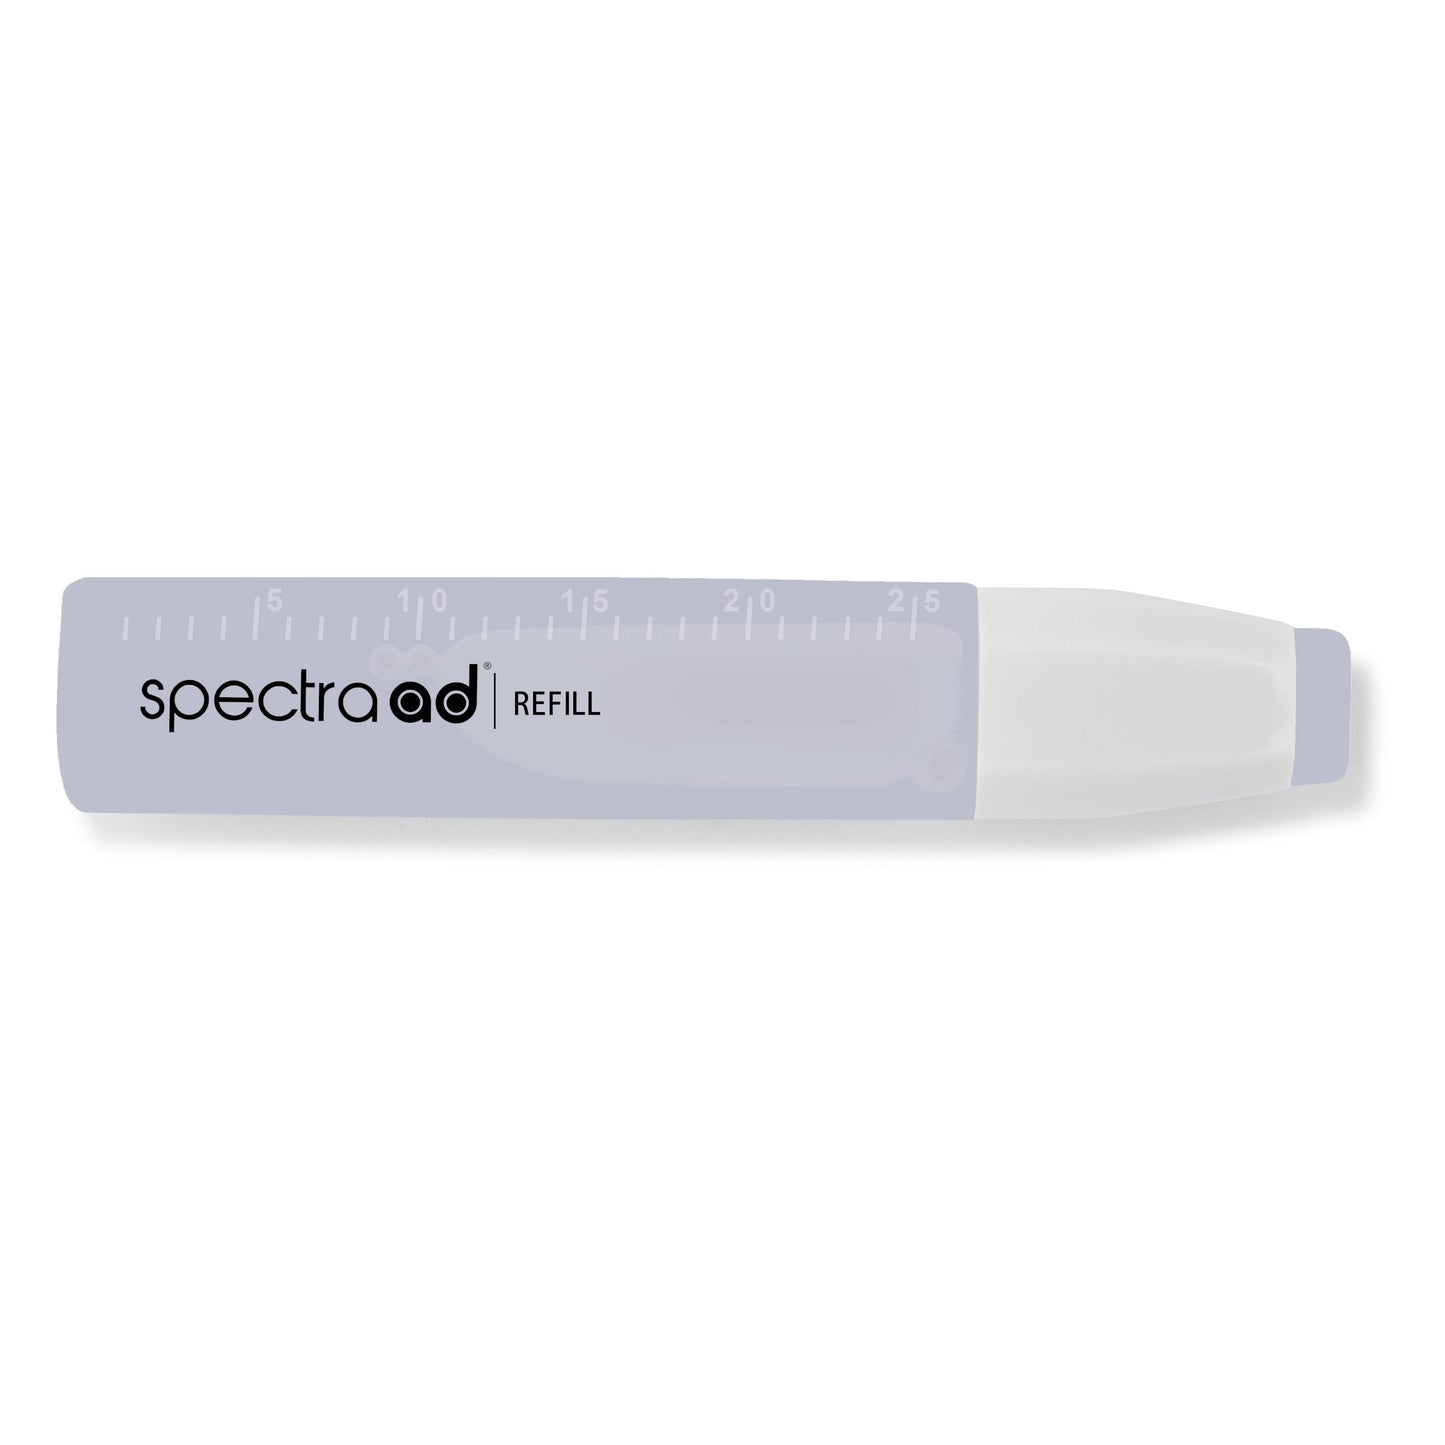 029 - Cool Gray 70% - Spectra AD Refill Bottle